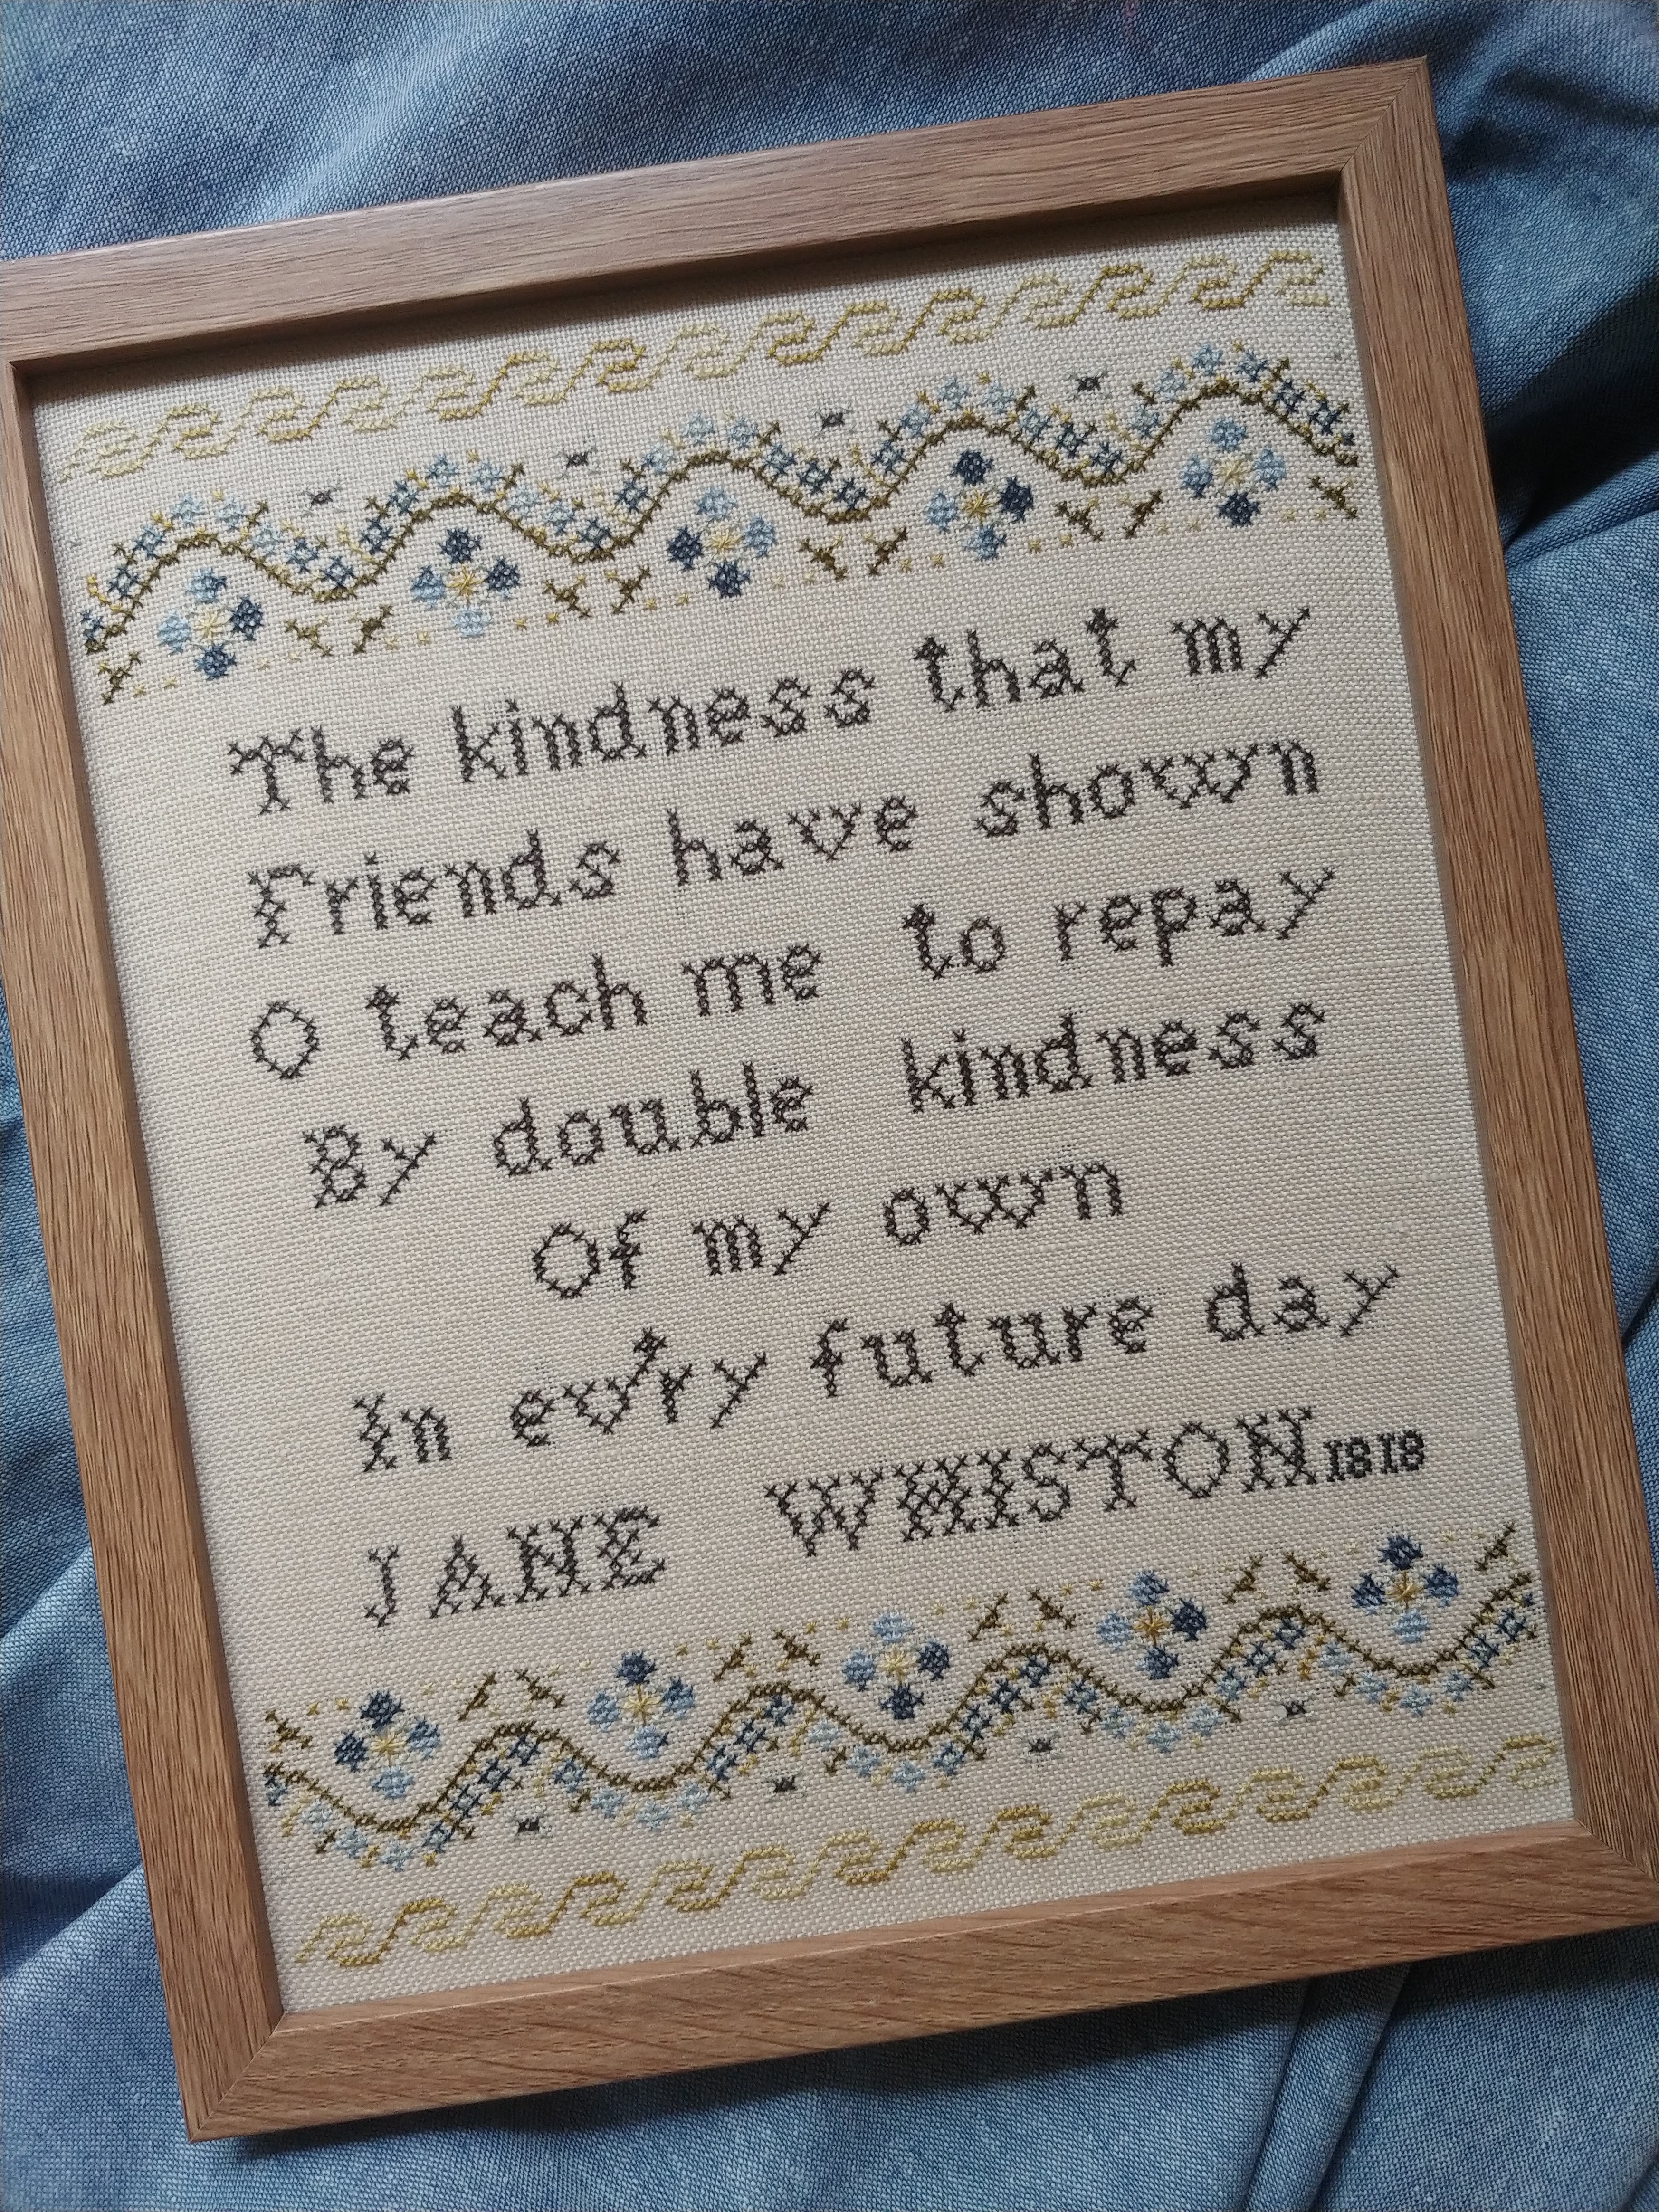 On Kindness: Jane Whiston 1818 (+thread pack add-on) | Mojo Stitches - Marketplace